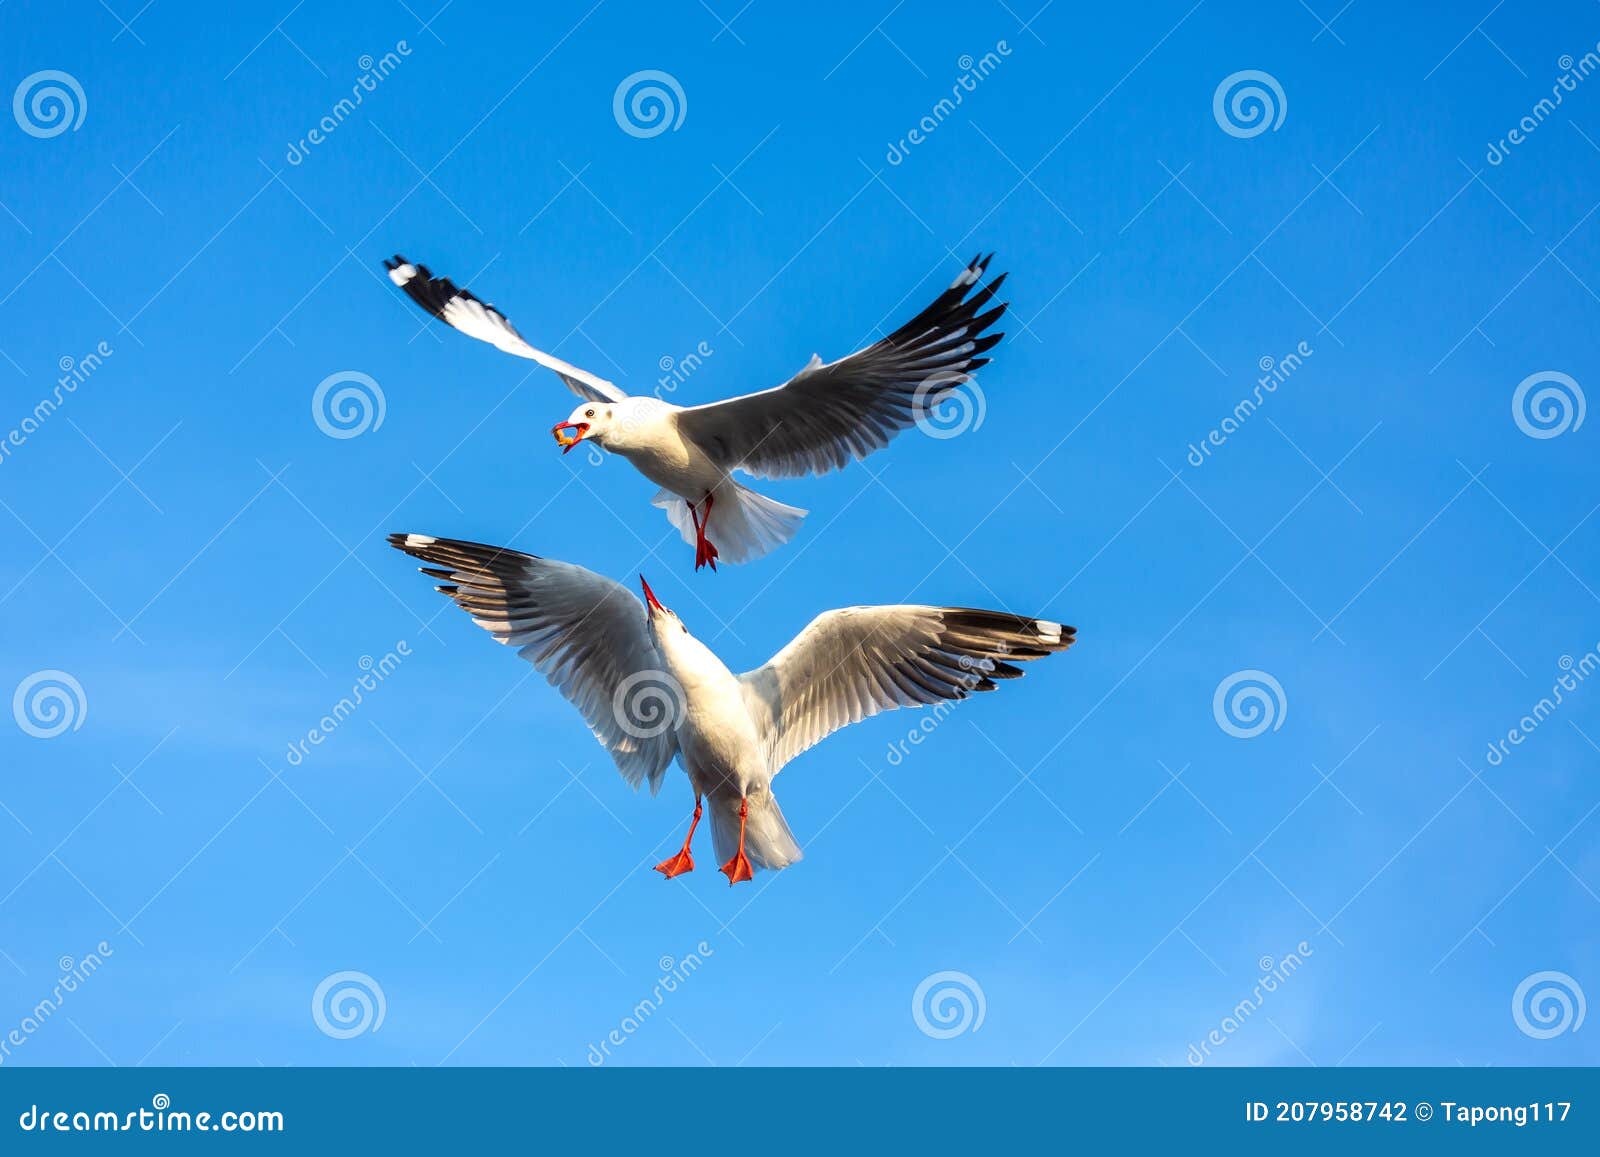 two seagulls vying for food